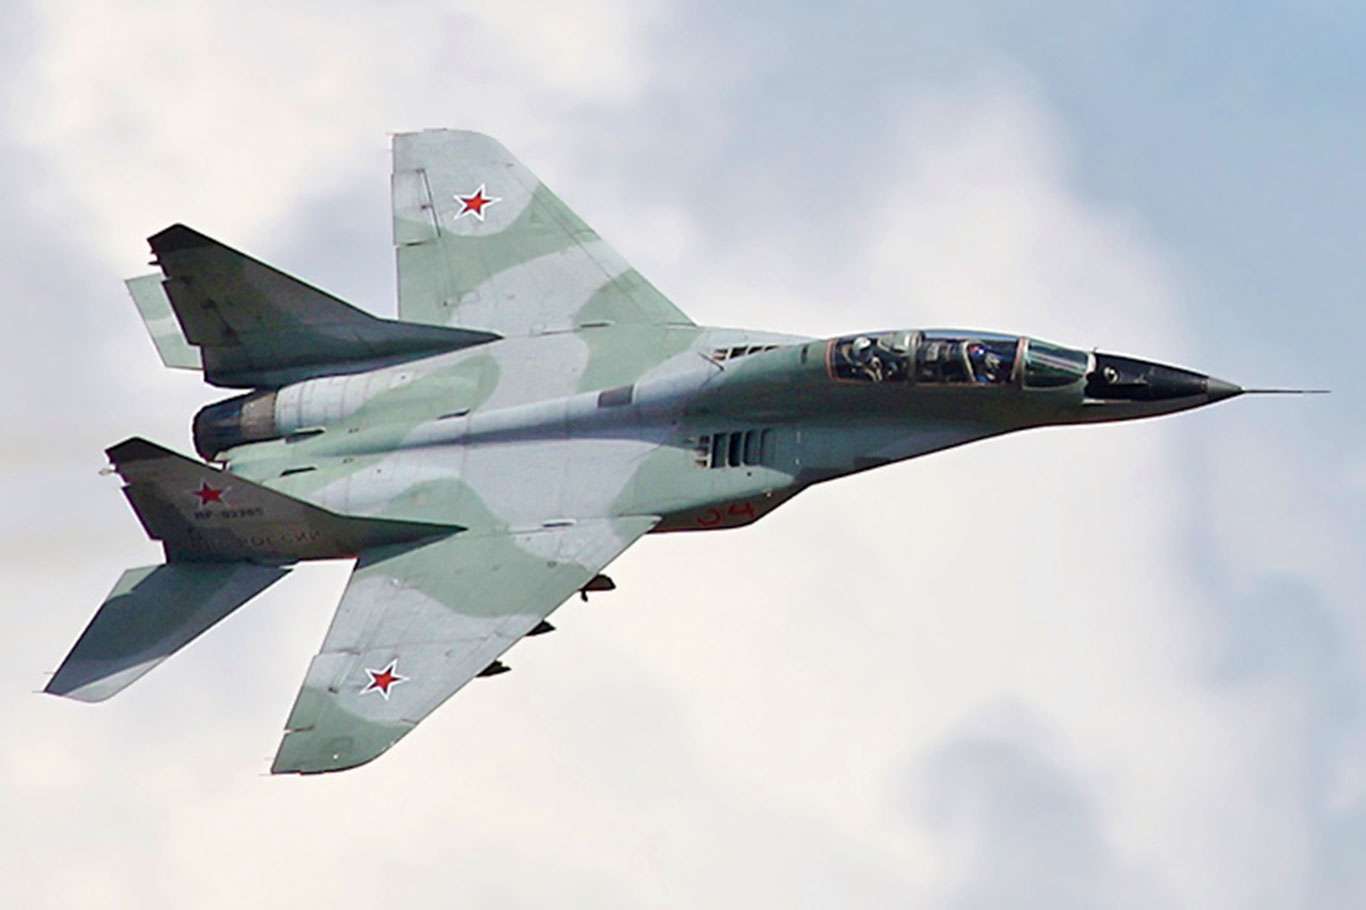 Russia says it shoots down MiG-29 aircraft of Ukrainian Air Force in Donetsk